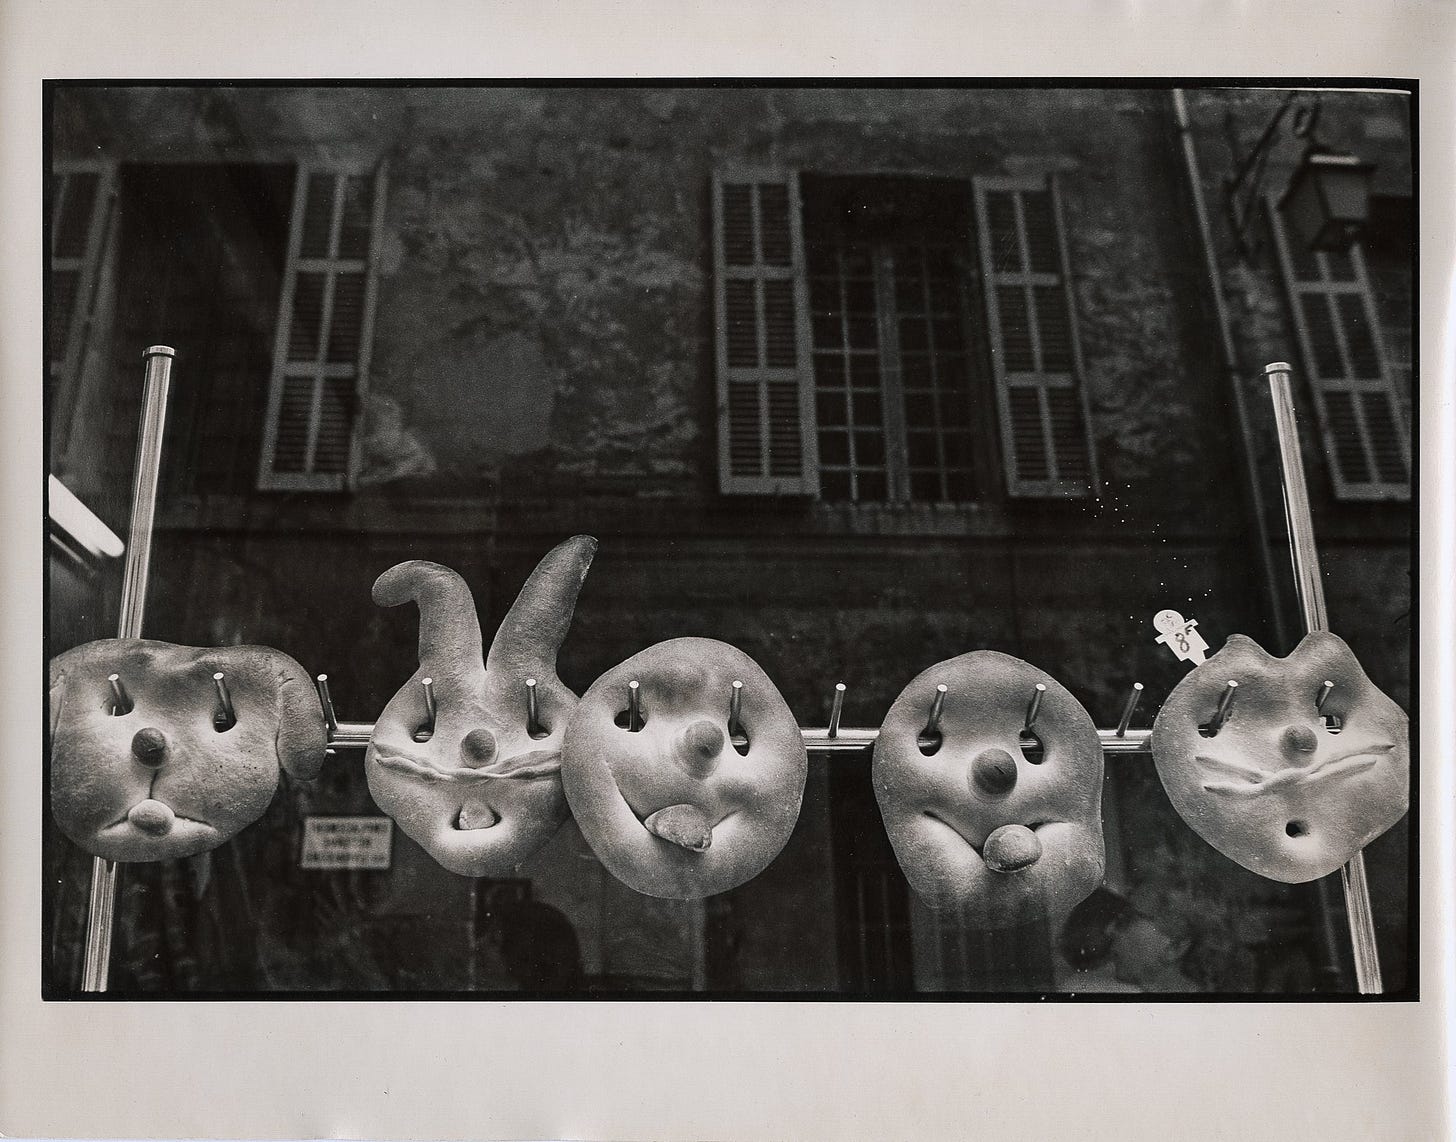 a photograph of French bread, shaped into faces with tongues sticking out, hanging in the window of a bakery